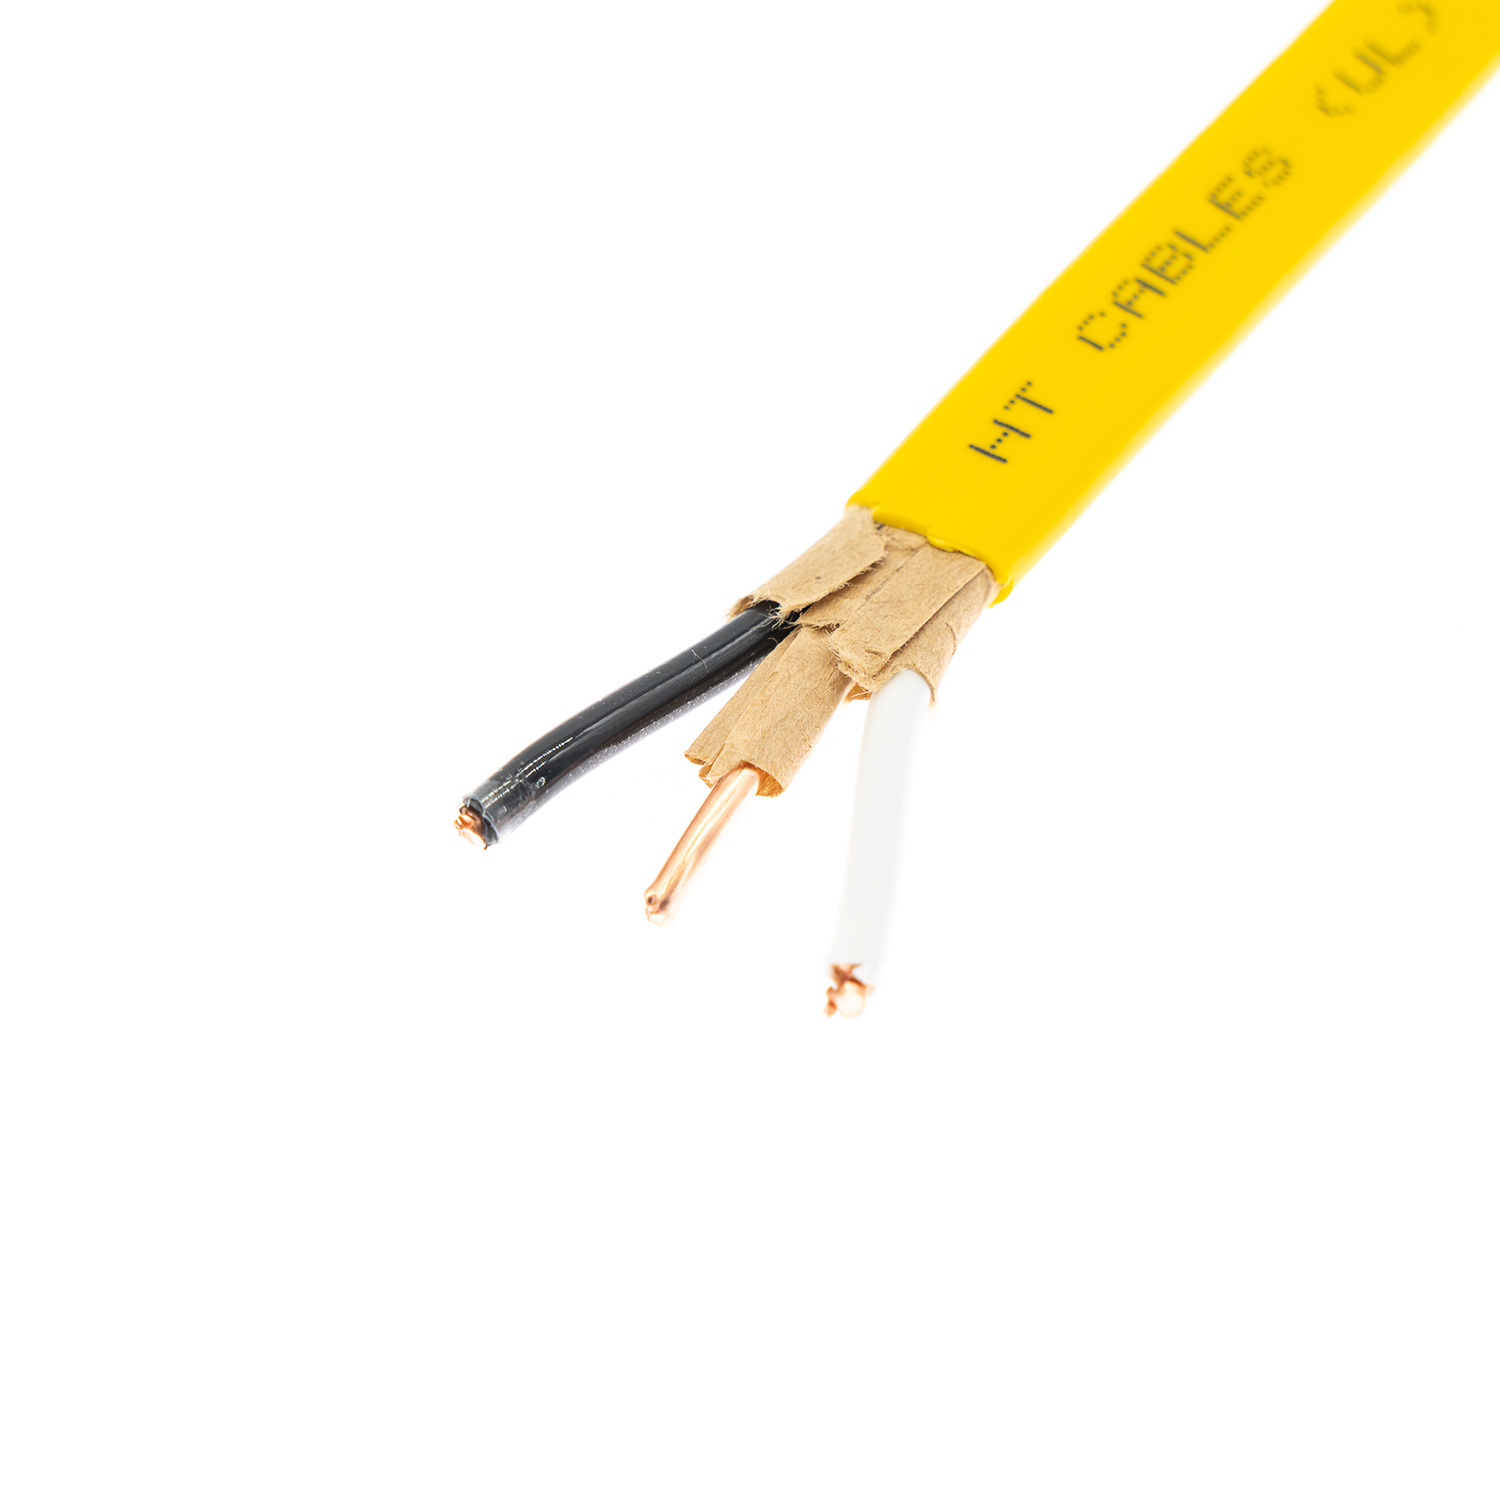 Electrical 600volts 14/2 12/3 12/2 Gauge with Ground Yellow 63 Romex Copper Wire Nm-B Cable 1000 FT Non Metallic Sheathed